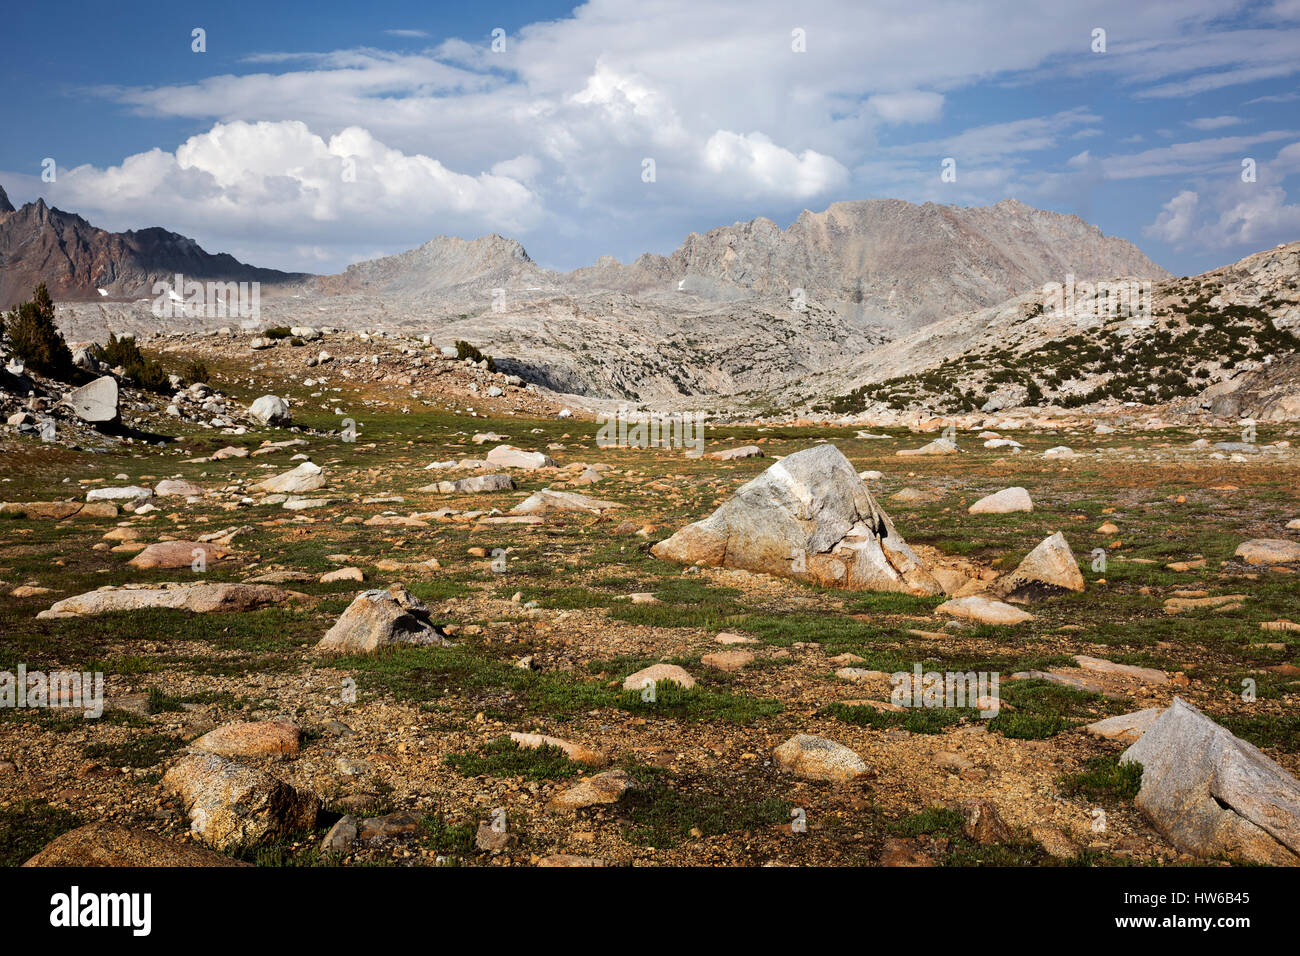 CA03091-00...CALIFORNIA - Meadows near Goethe Lake view towards Piute Pass in the John Muir Wilderness area; Inyo National Forest. Stock Photo